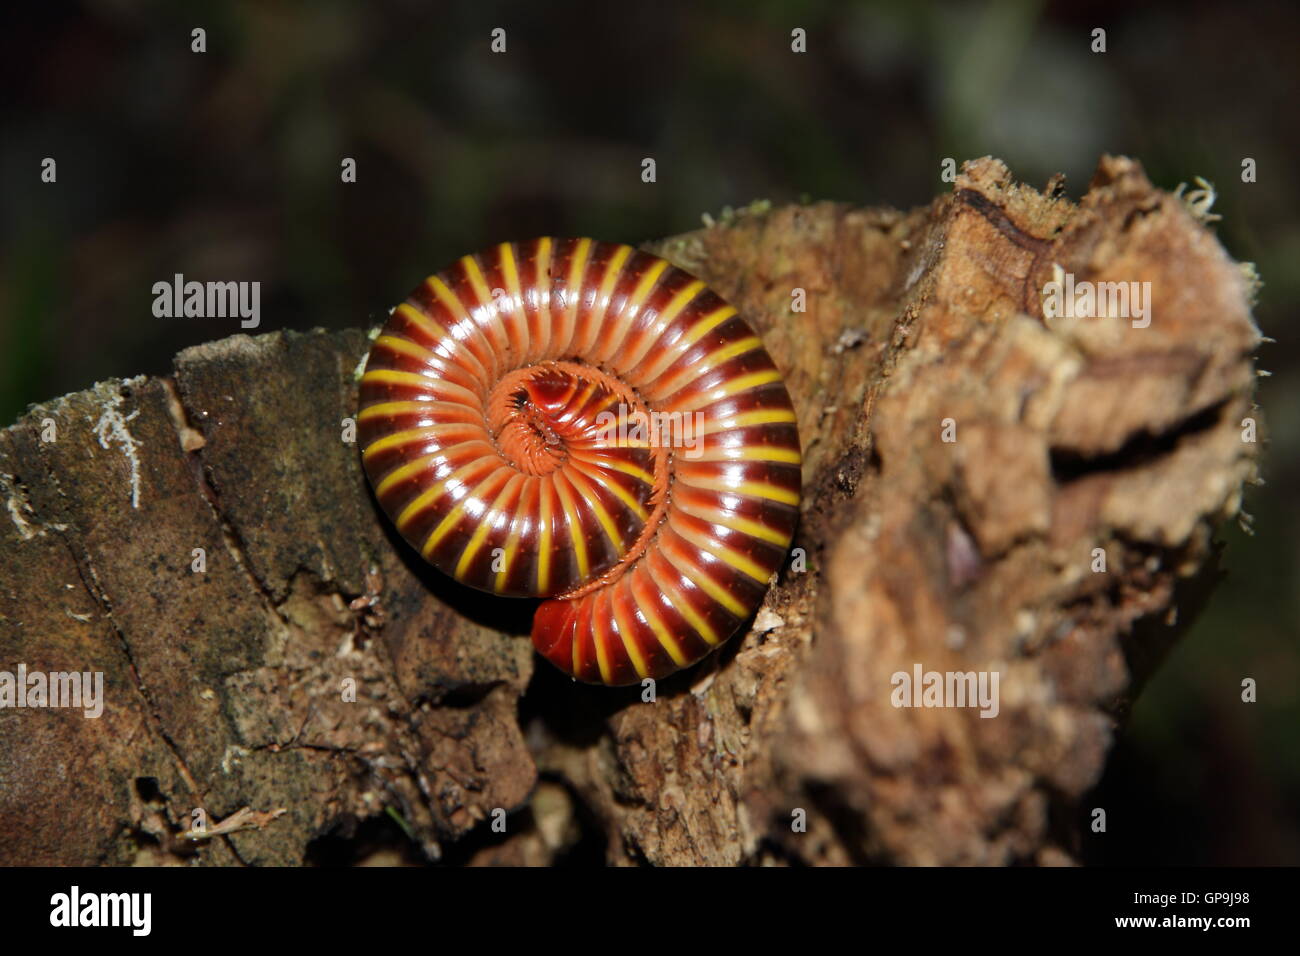 A colorfull giant millipede rolled up at night near Manuel Antonio, Costa Rica. Stock Photo